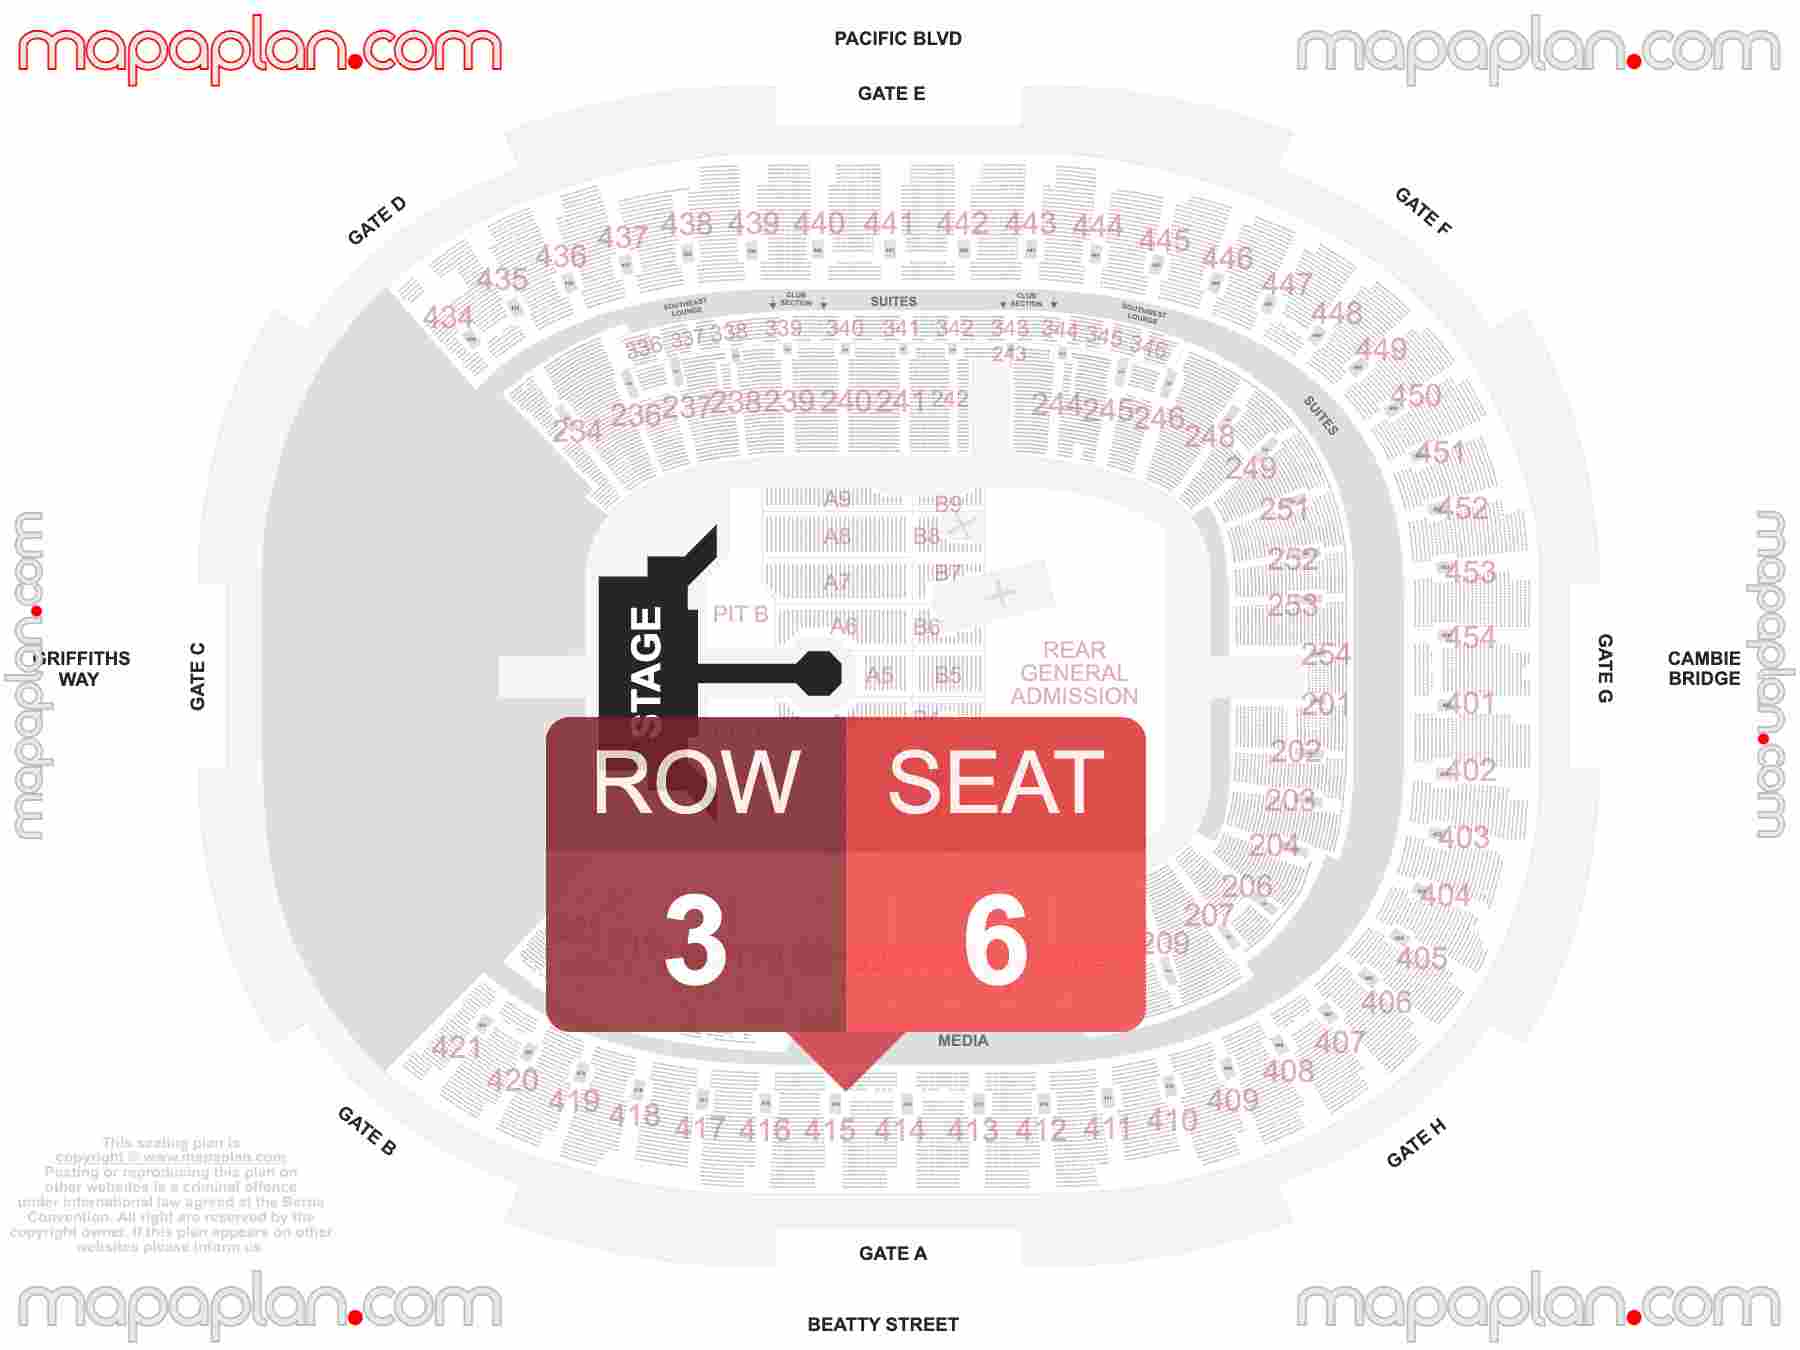 Vancouver BC Place seating map Concert with extended catwalk runway B-stage & Pit floor standing room only find best seats row numbering system chart showing how many seats per row - Individual 'find my seat' virtual locator